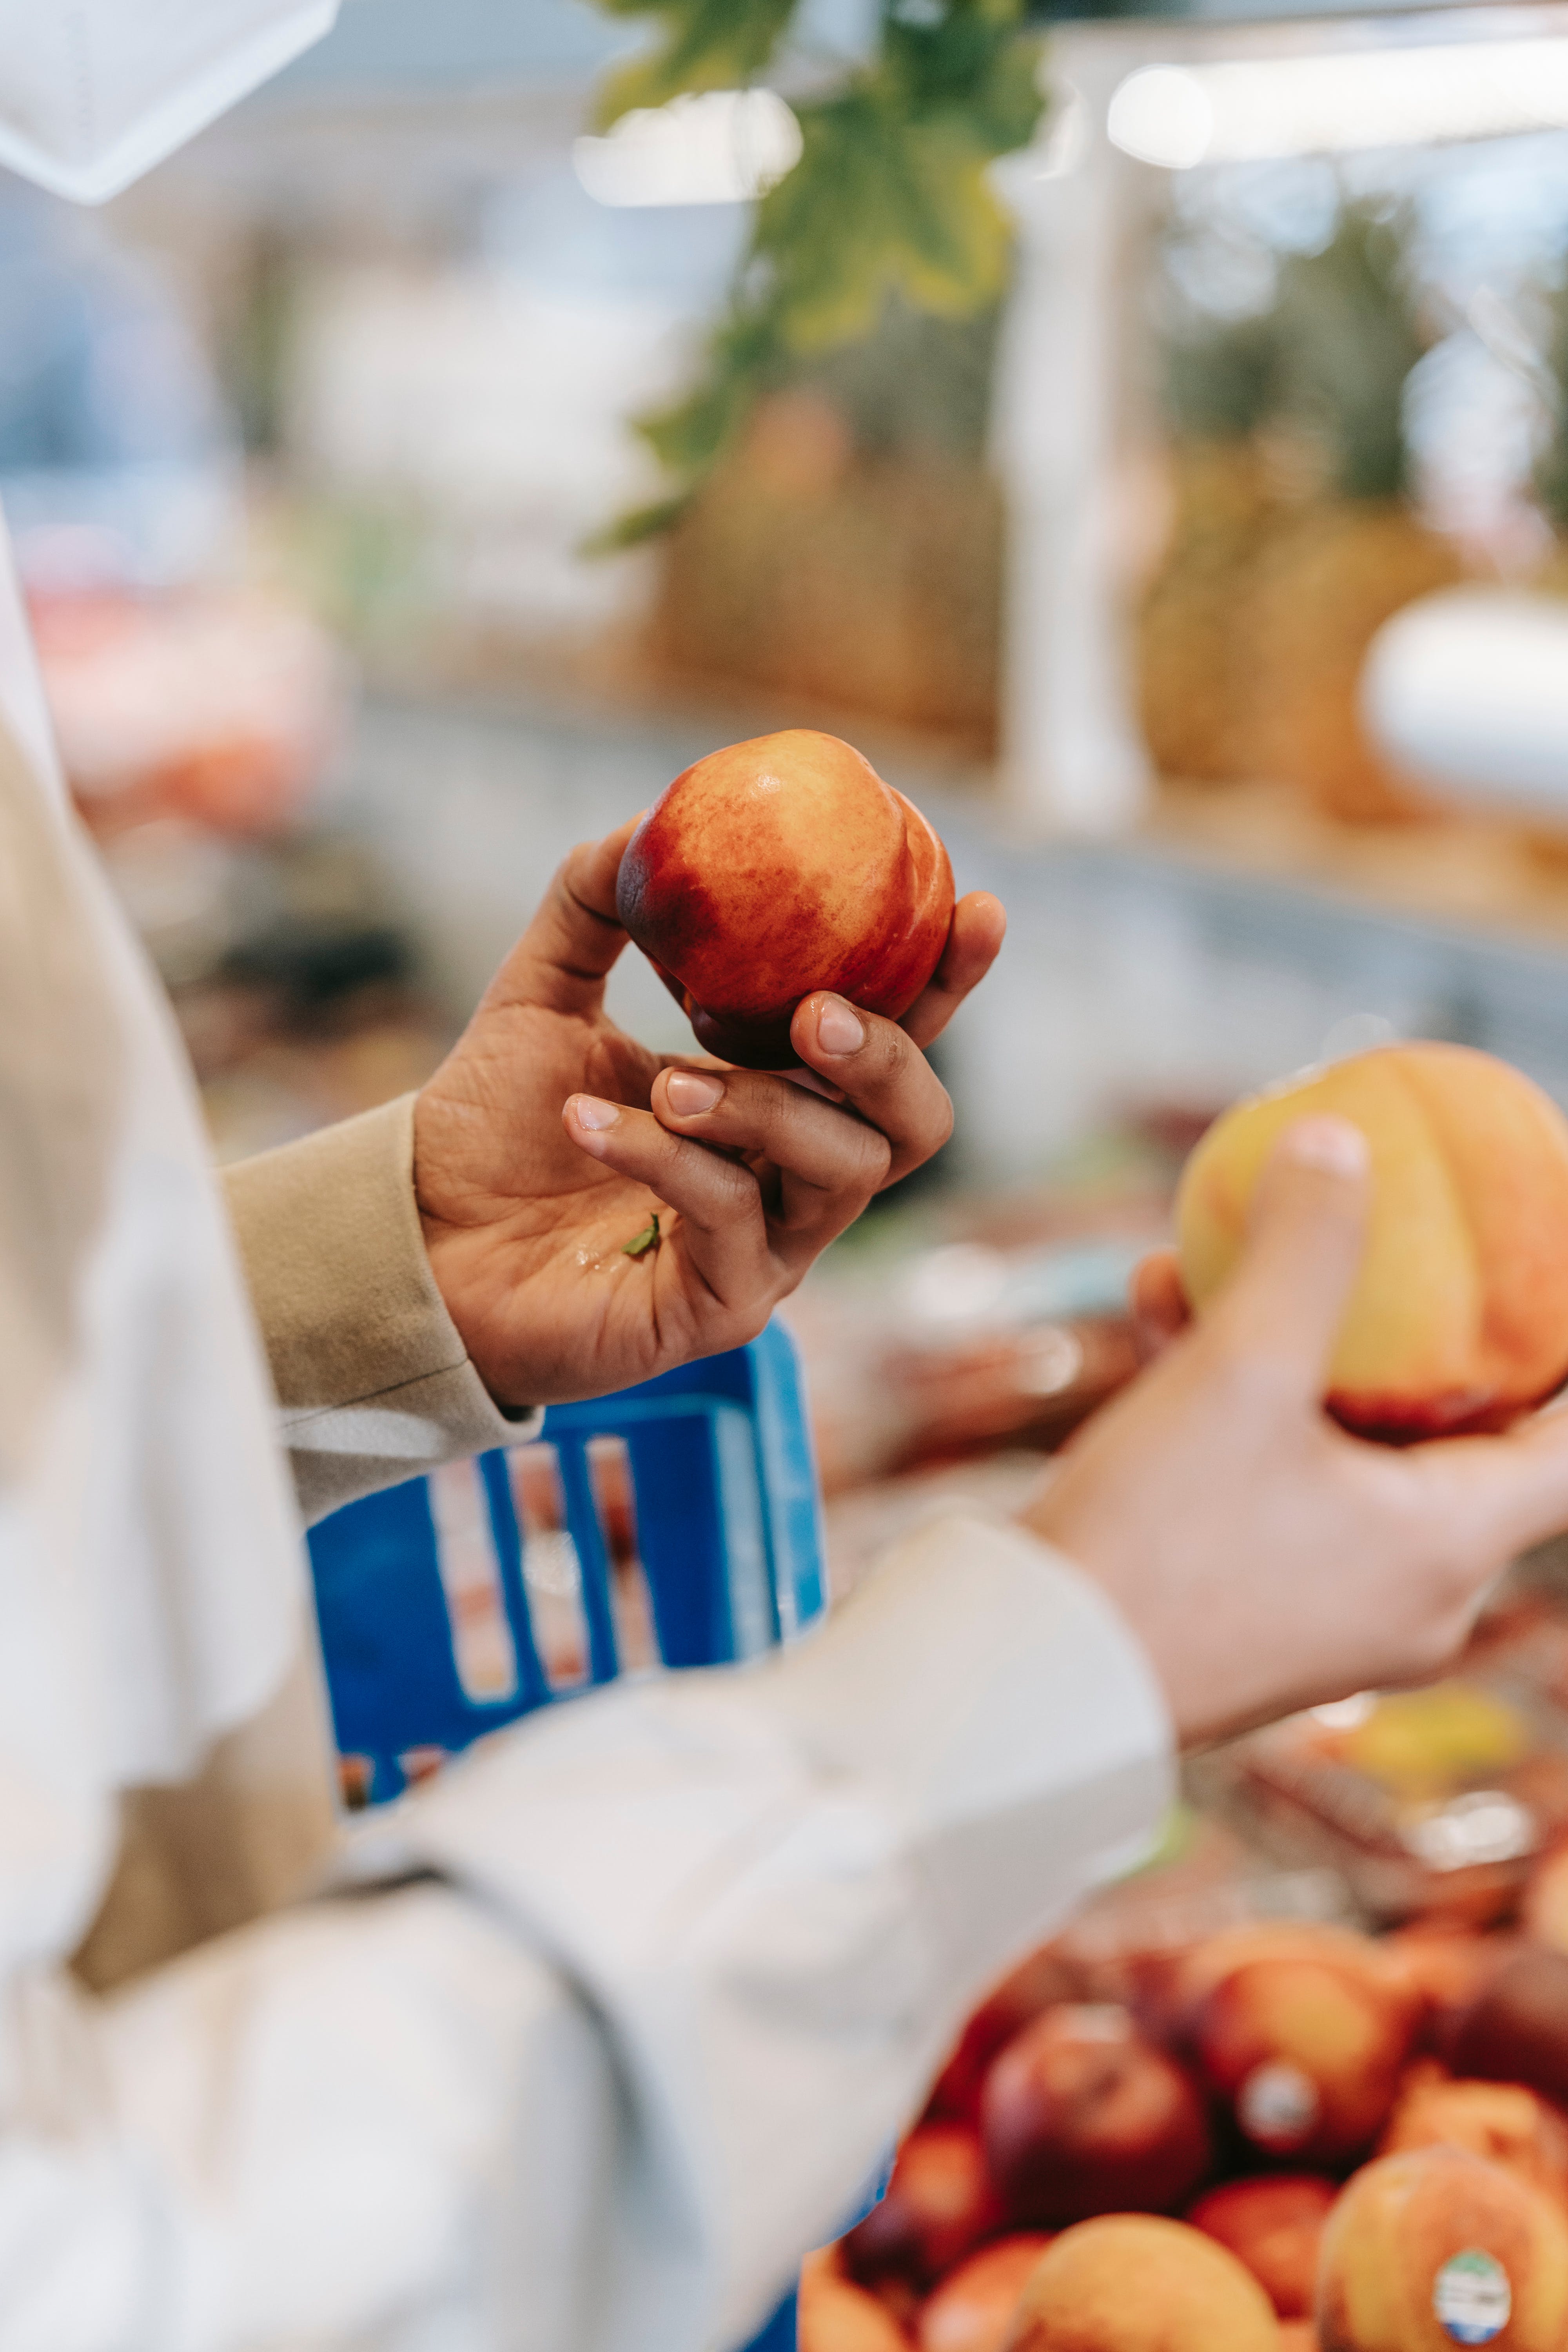 Someone packing fruit in a store | Source: Pexels